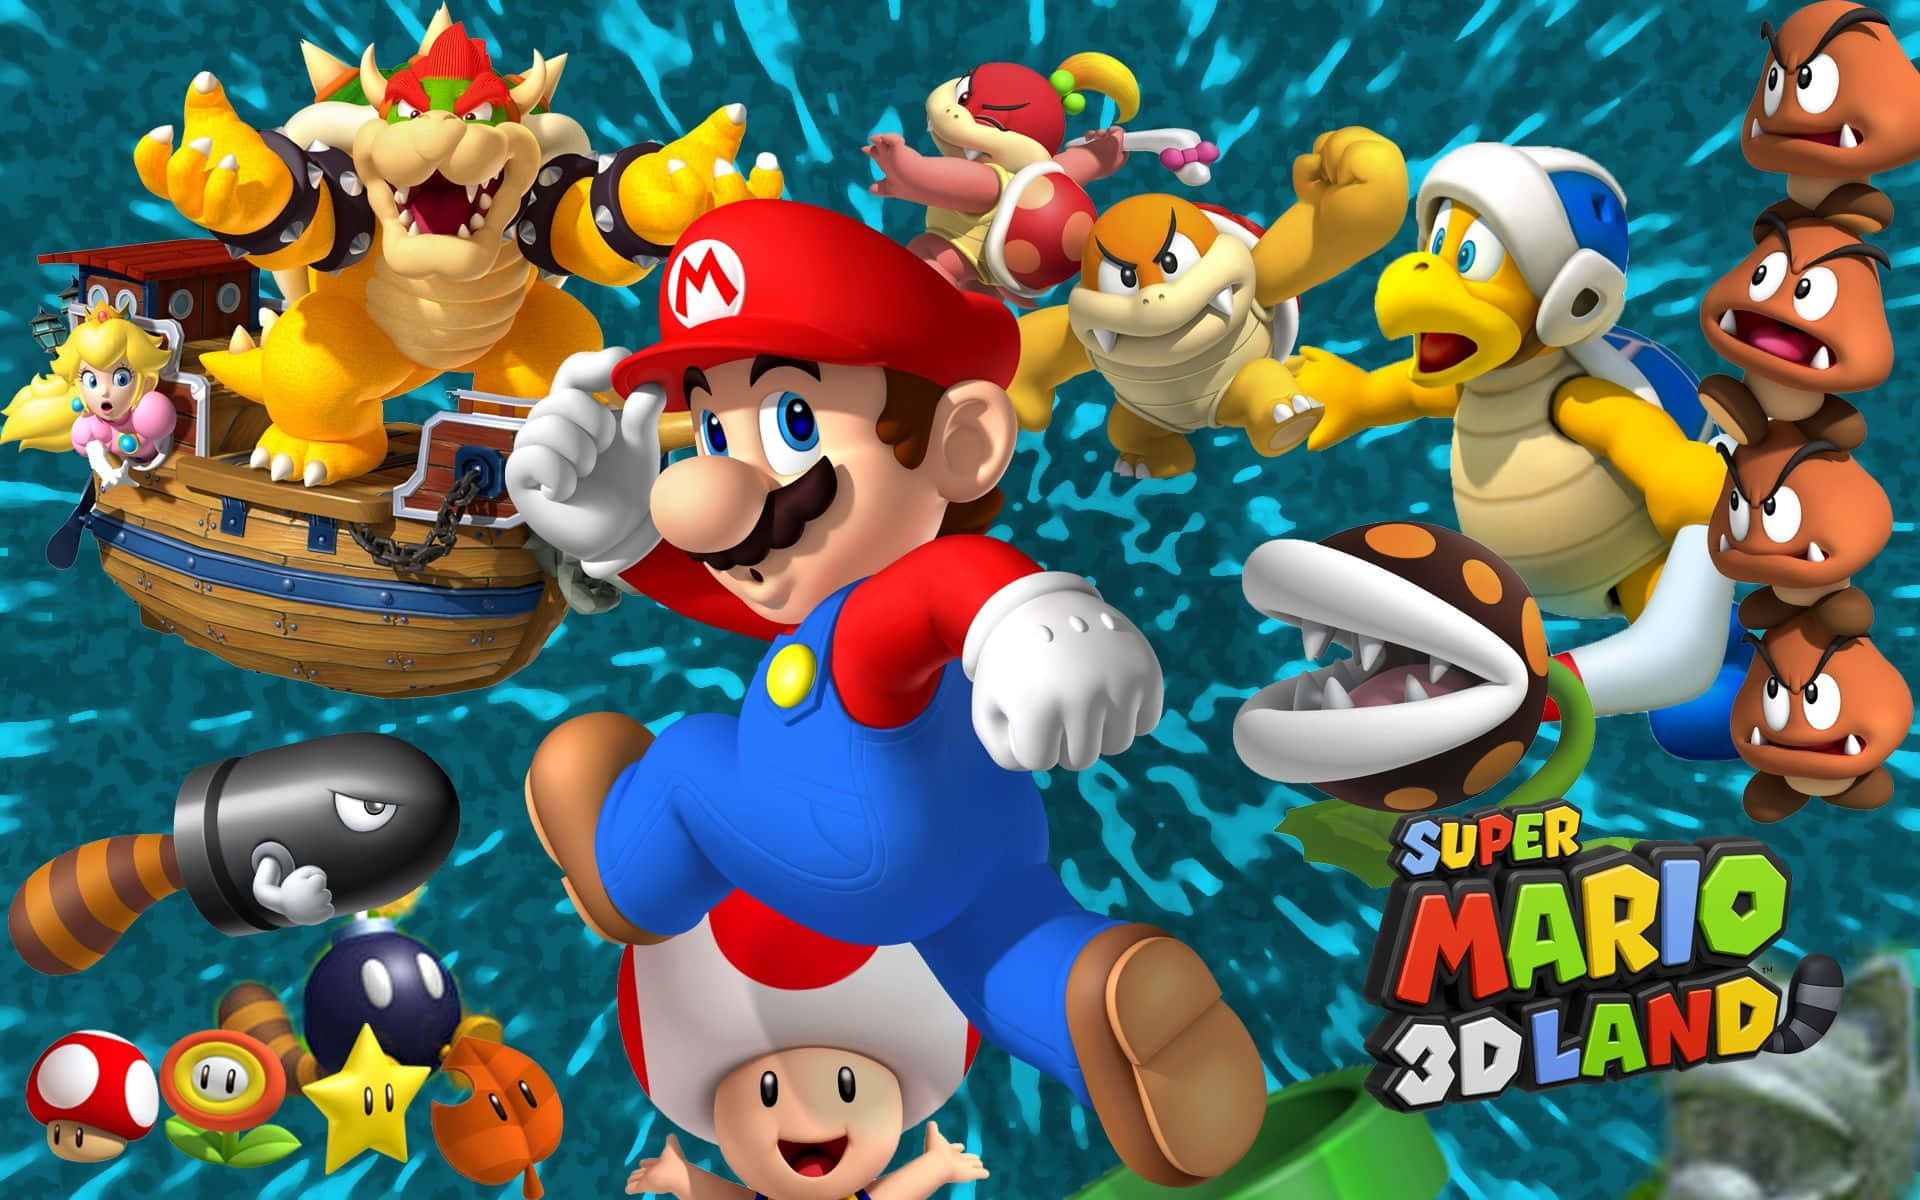 Supermario 3d Land Would Be Translated To 